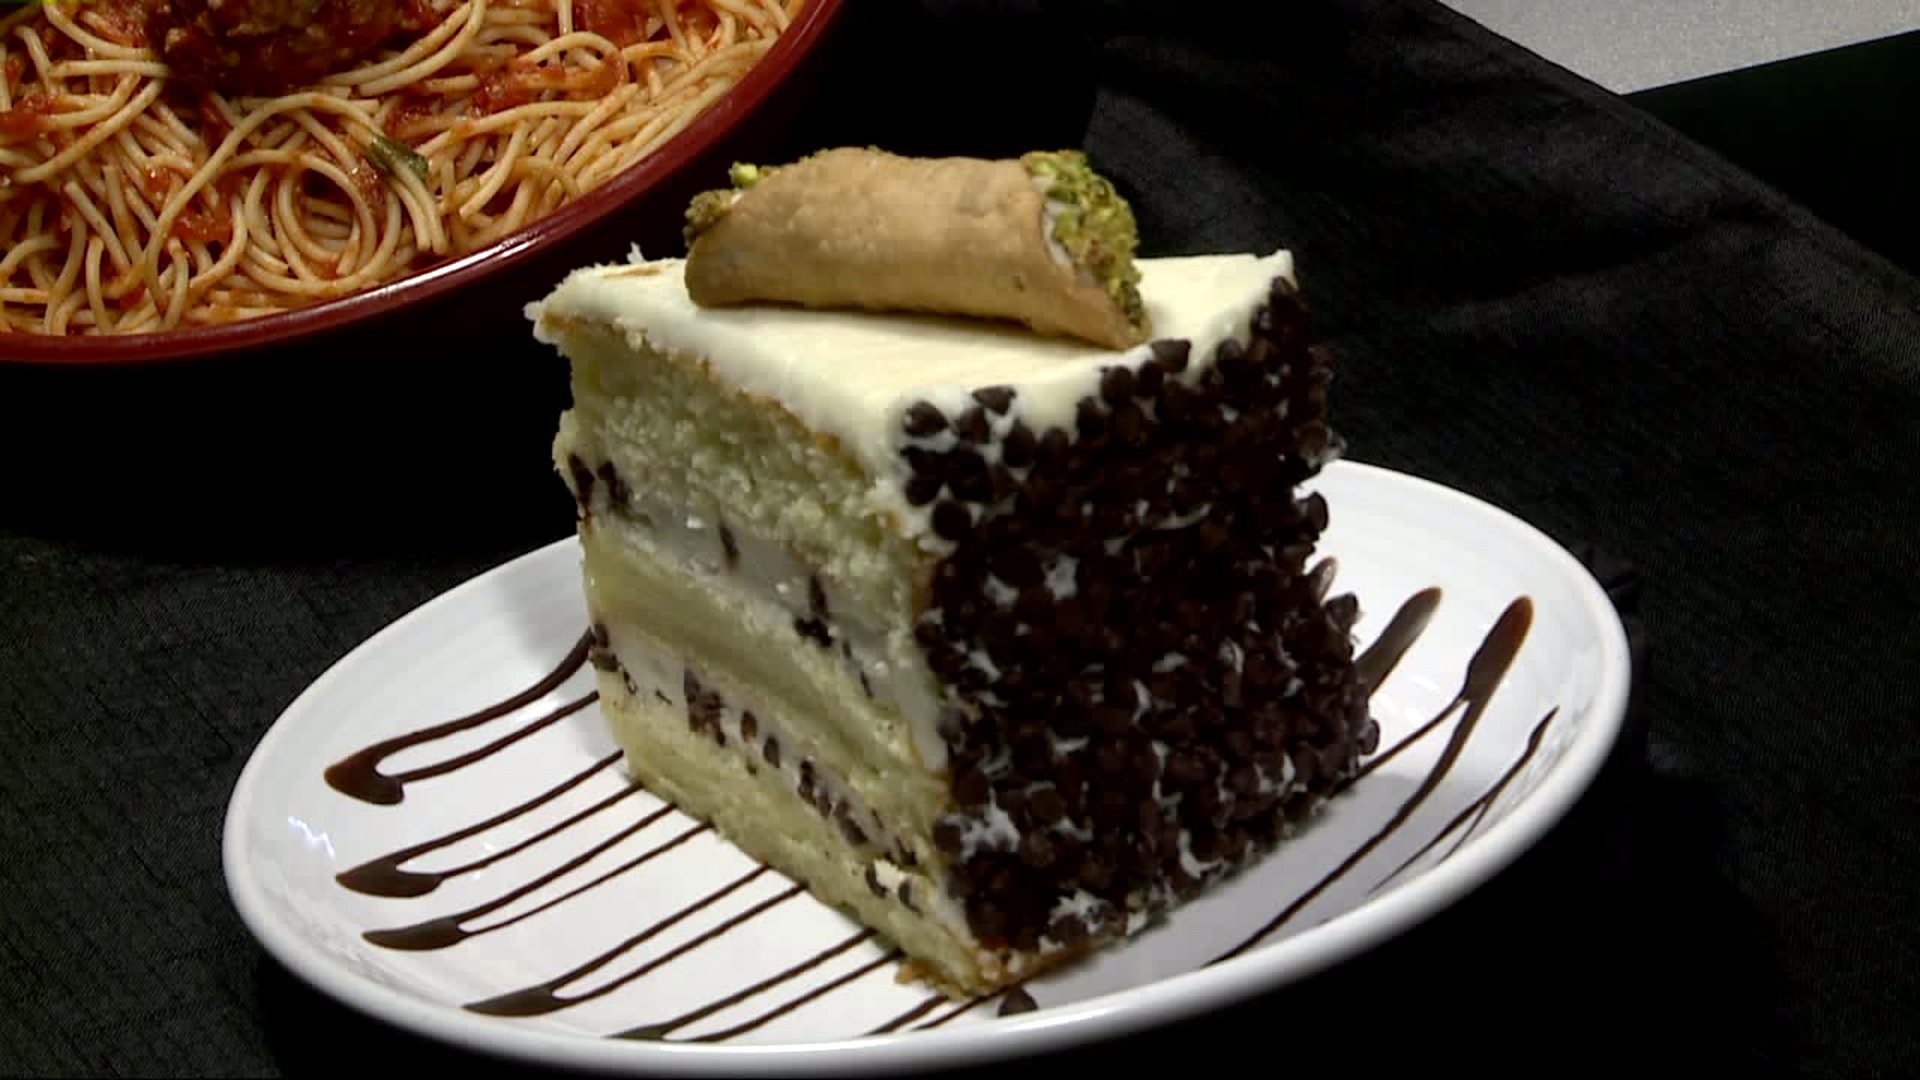 Carrabba`s Italian Grill stops by the FOX43 Kitchen with perfect grill recipes for the spring